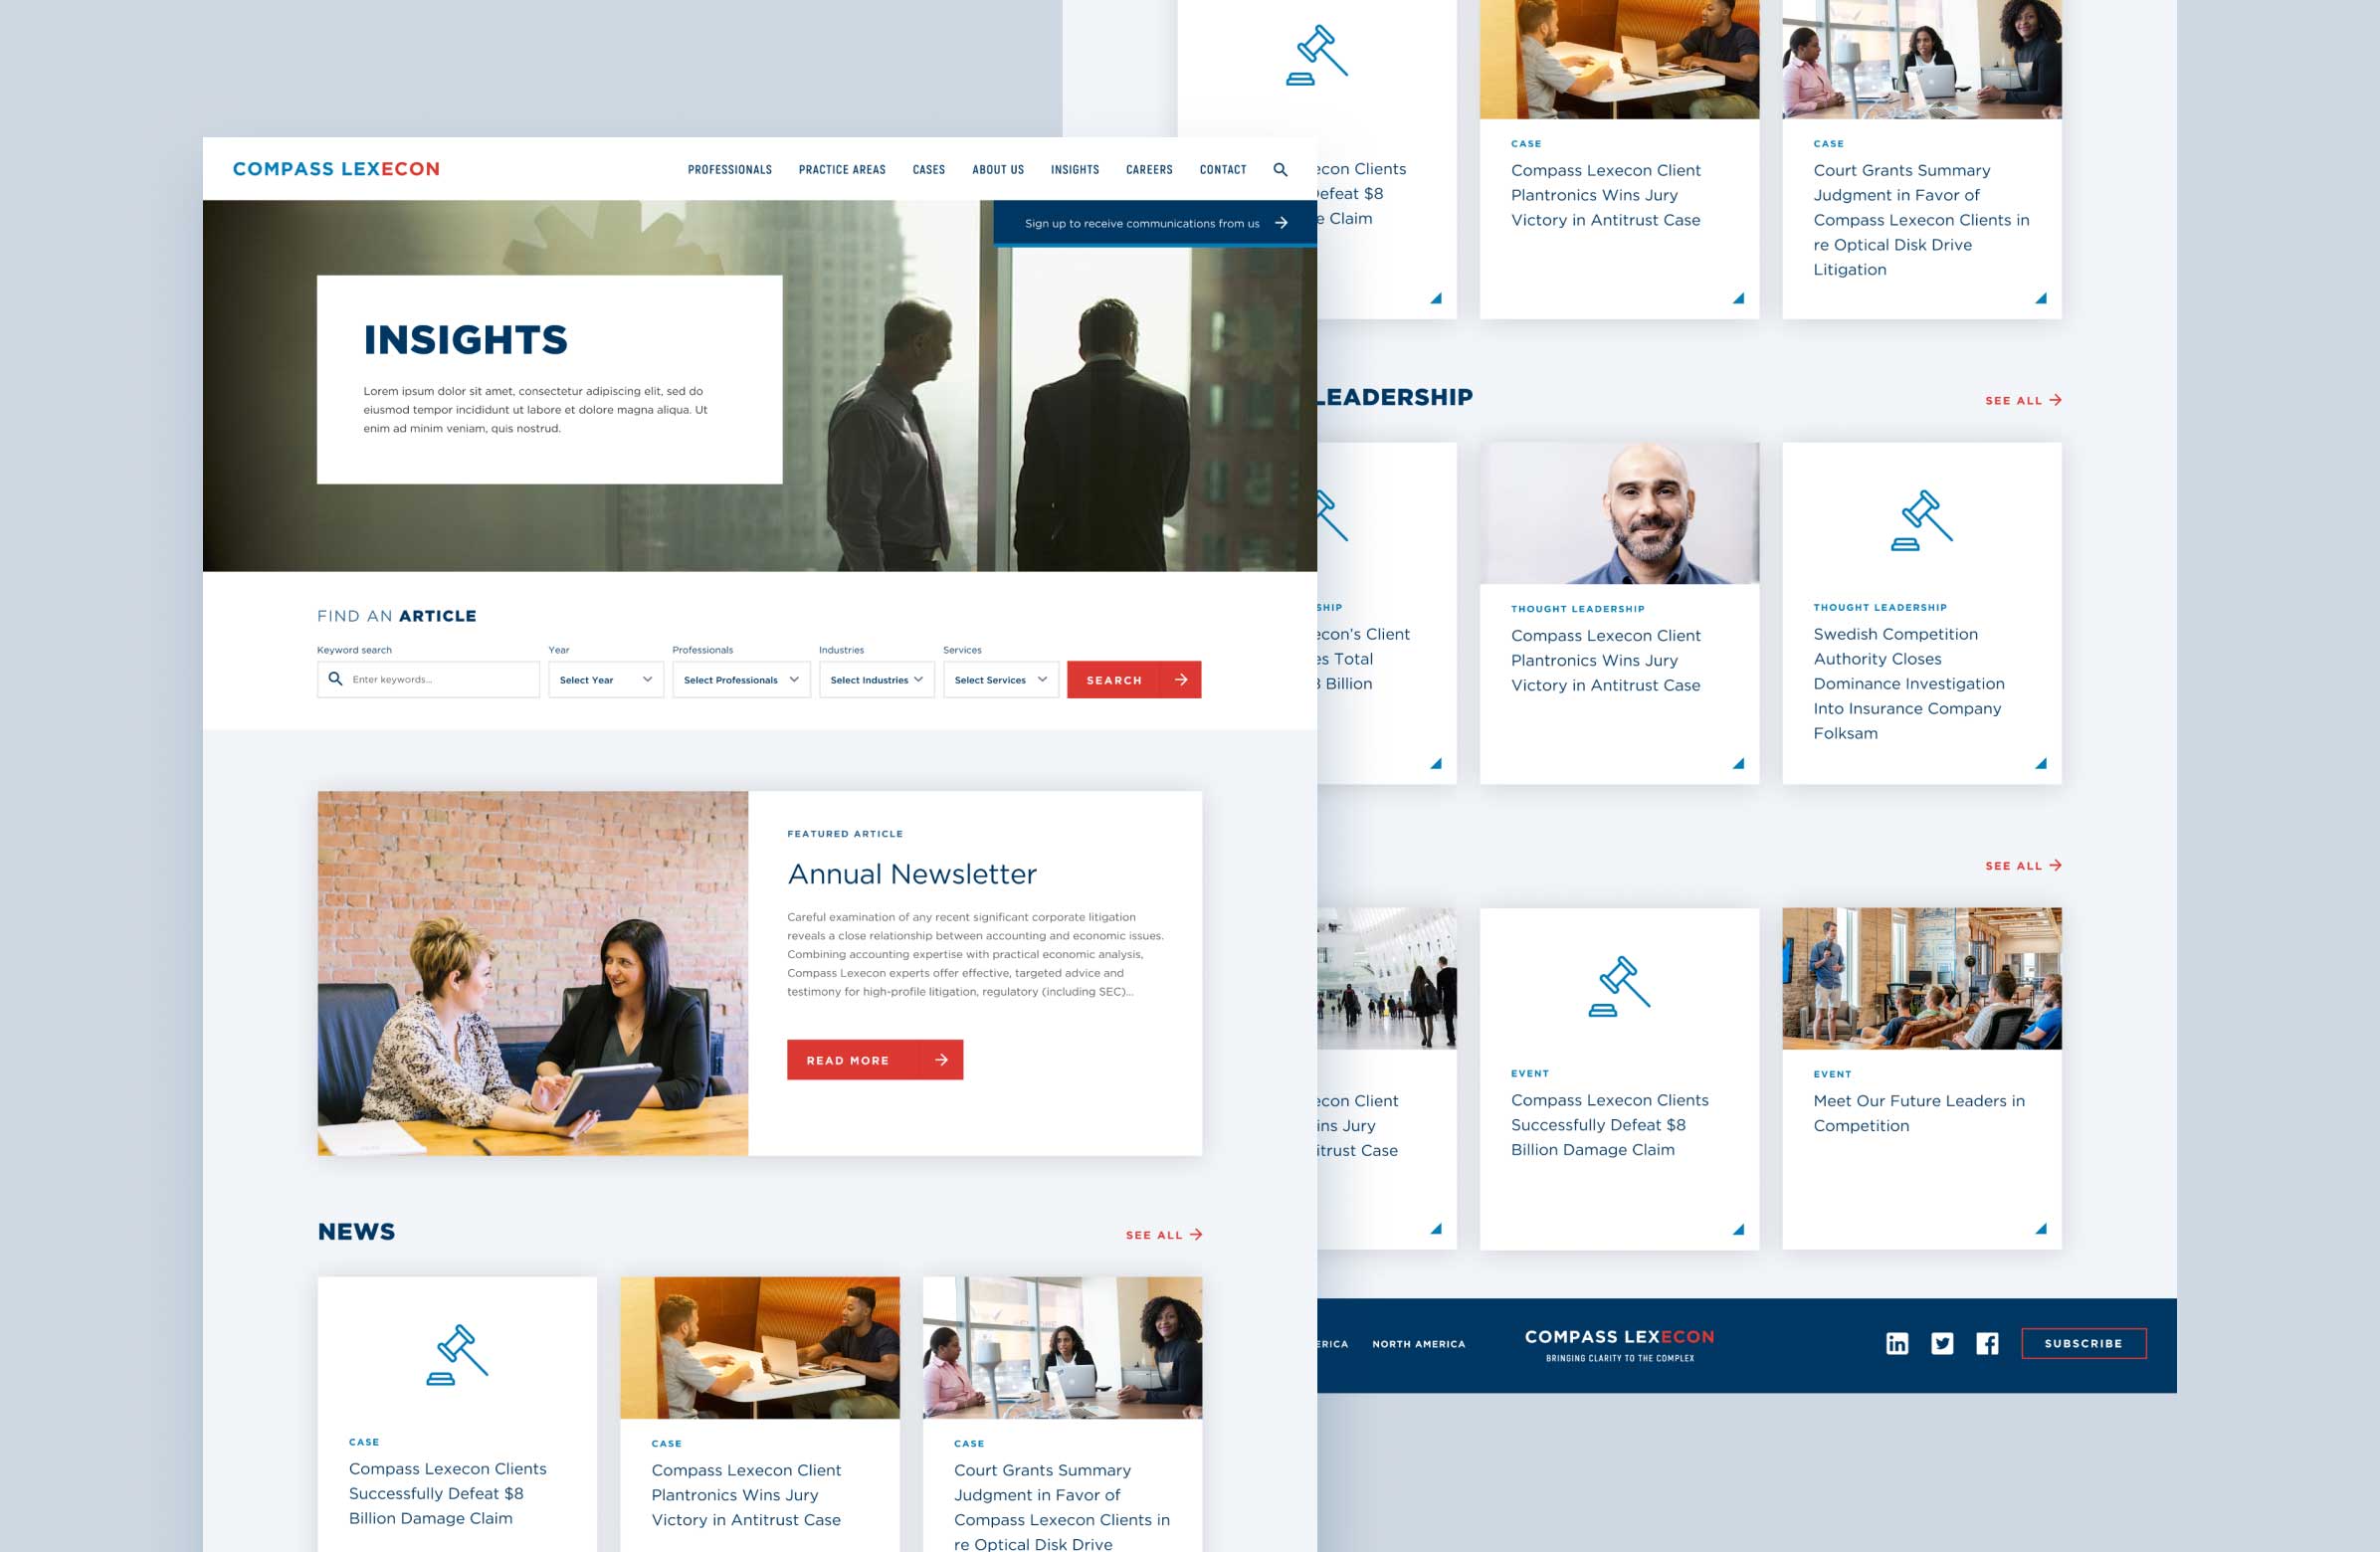 A composition of the insights page for the Compass Lexecon website that was designed and built by Fresh Consulting